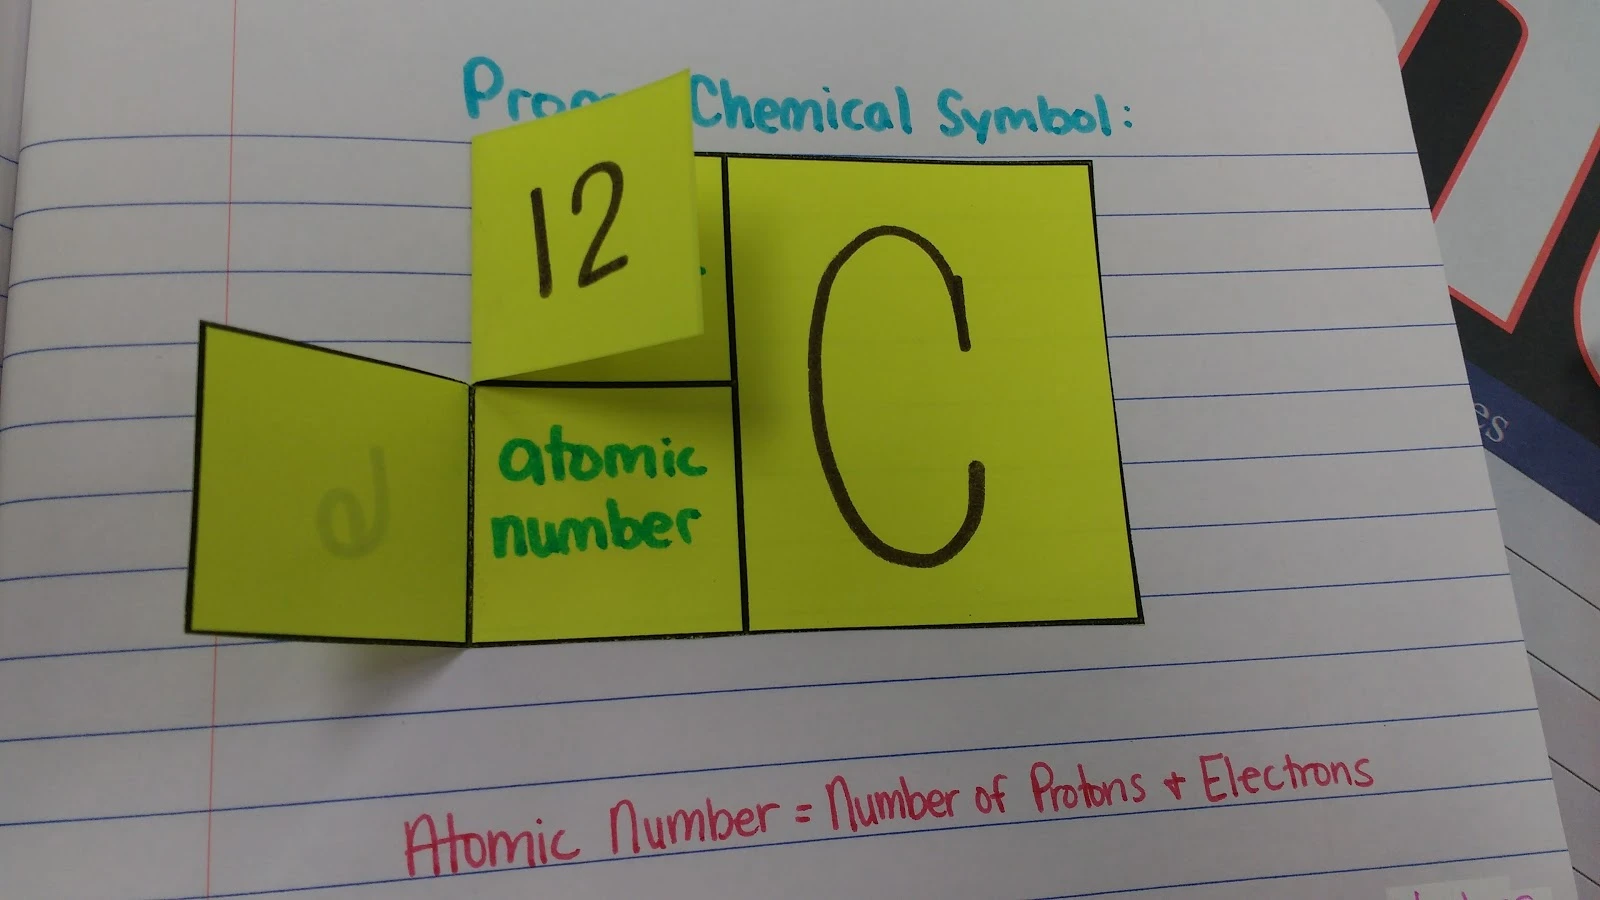 Atomic Number - Proper Chemical Symbol Foldable for Interactive Notebook in Physical Science or Chemistry